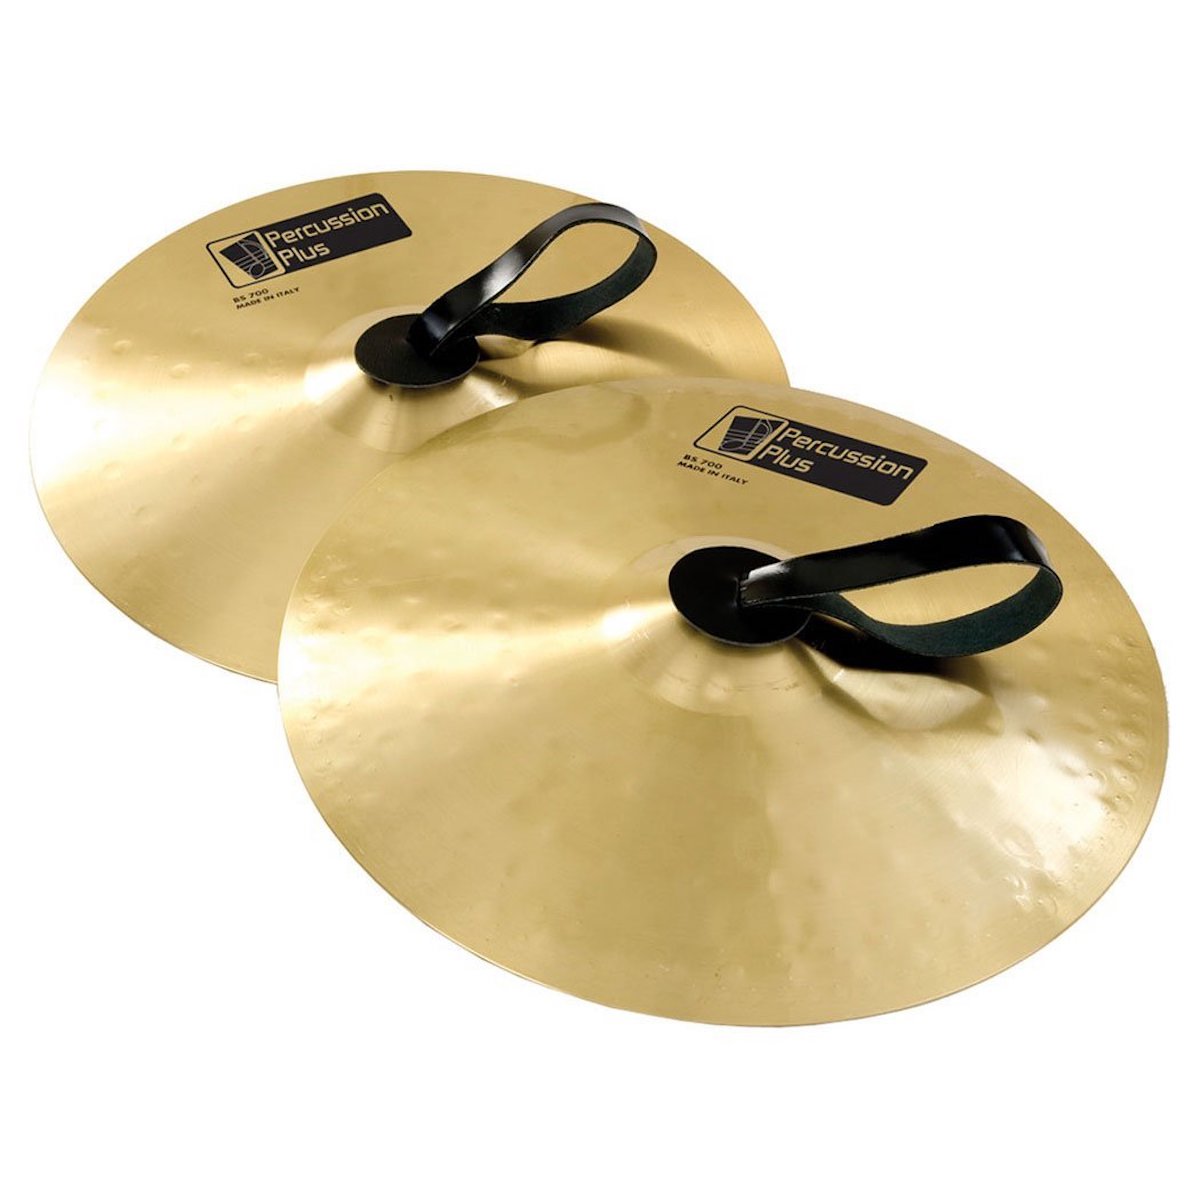 Percussion Plus Pair of School Cymbals (various sizes)